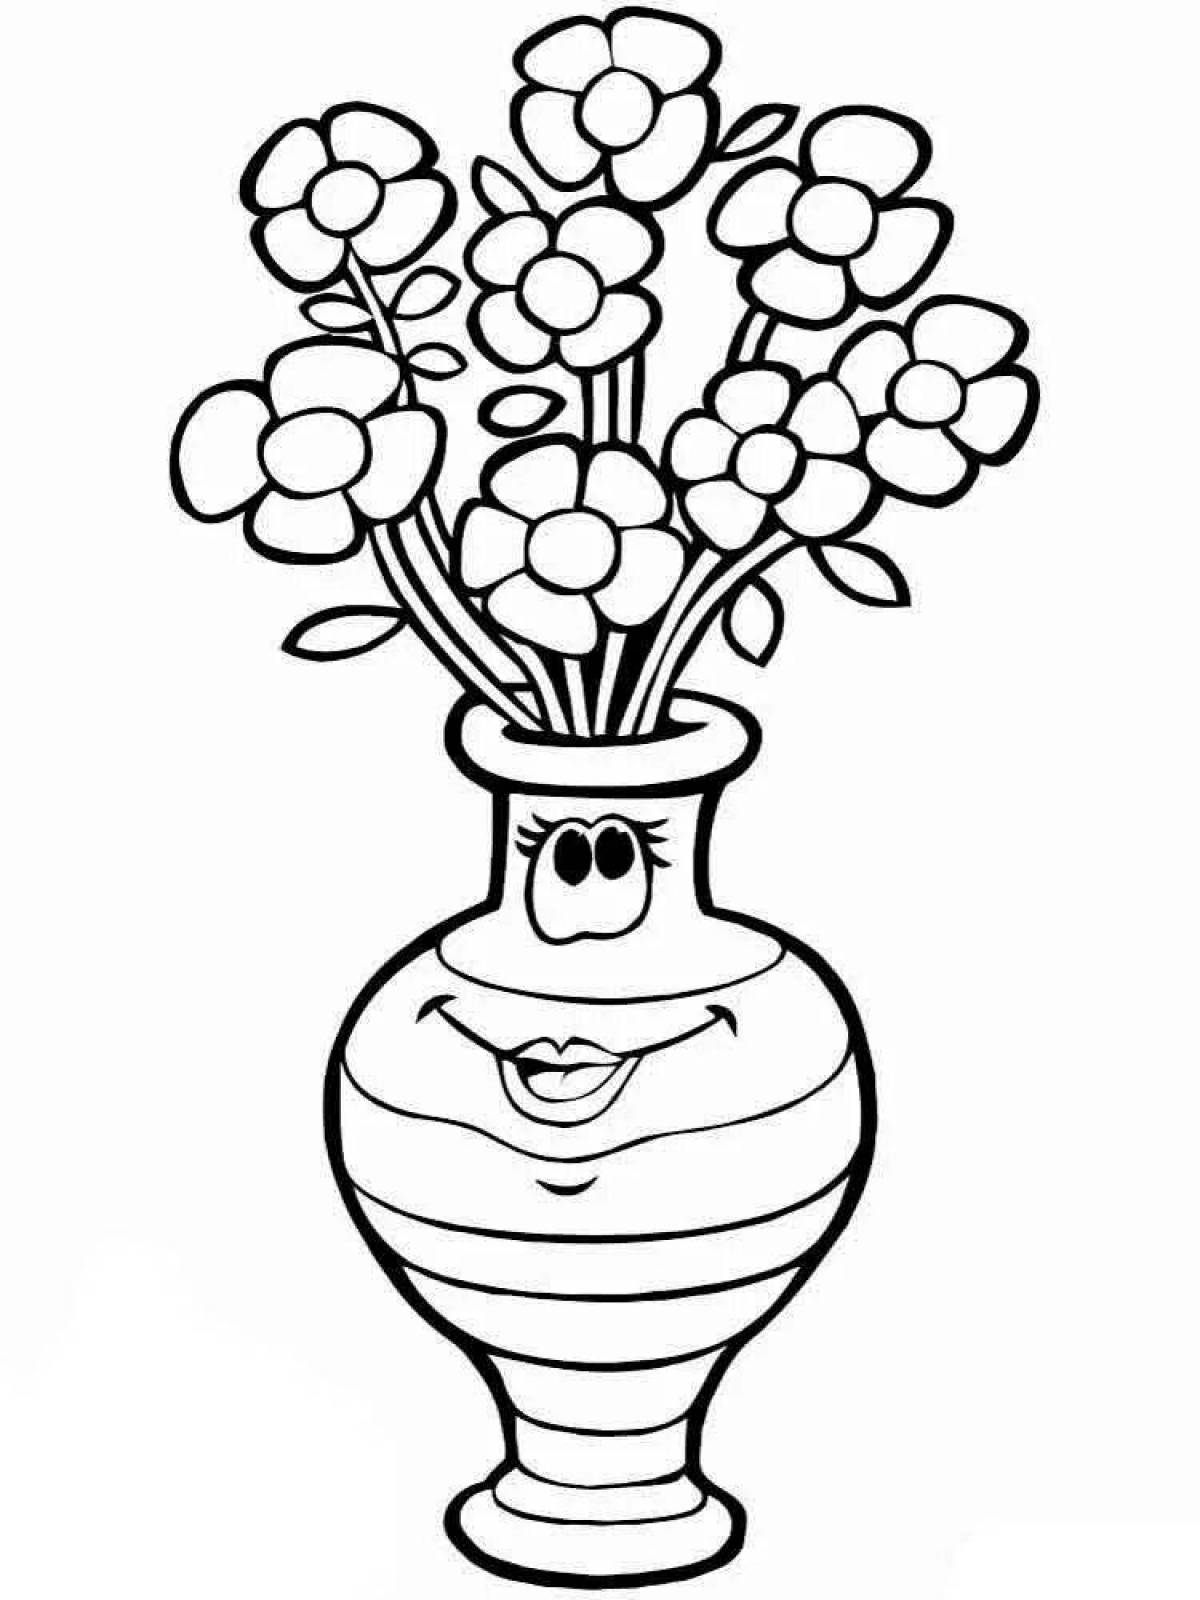 Bright coloring vase for the little ones